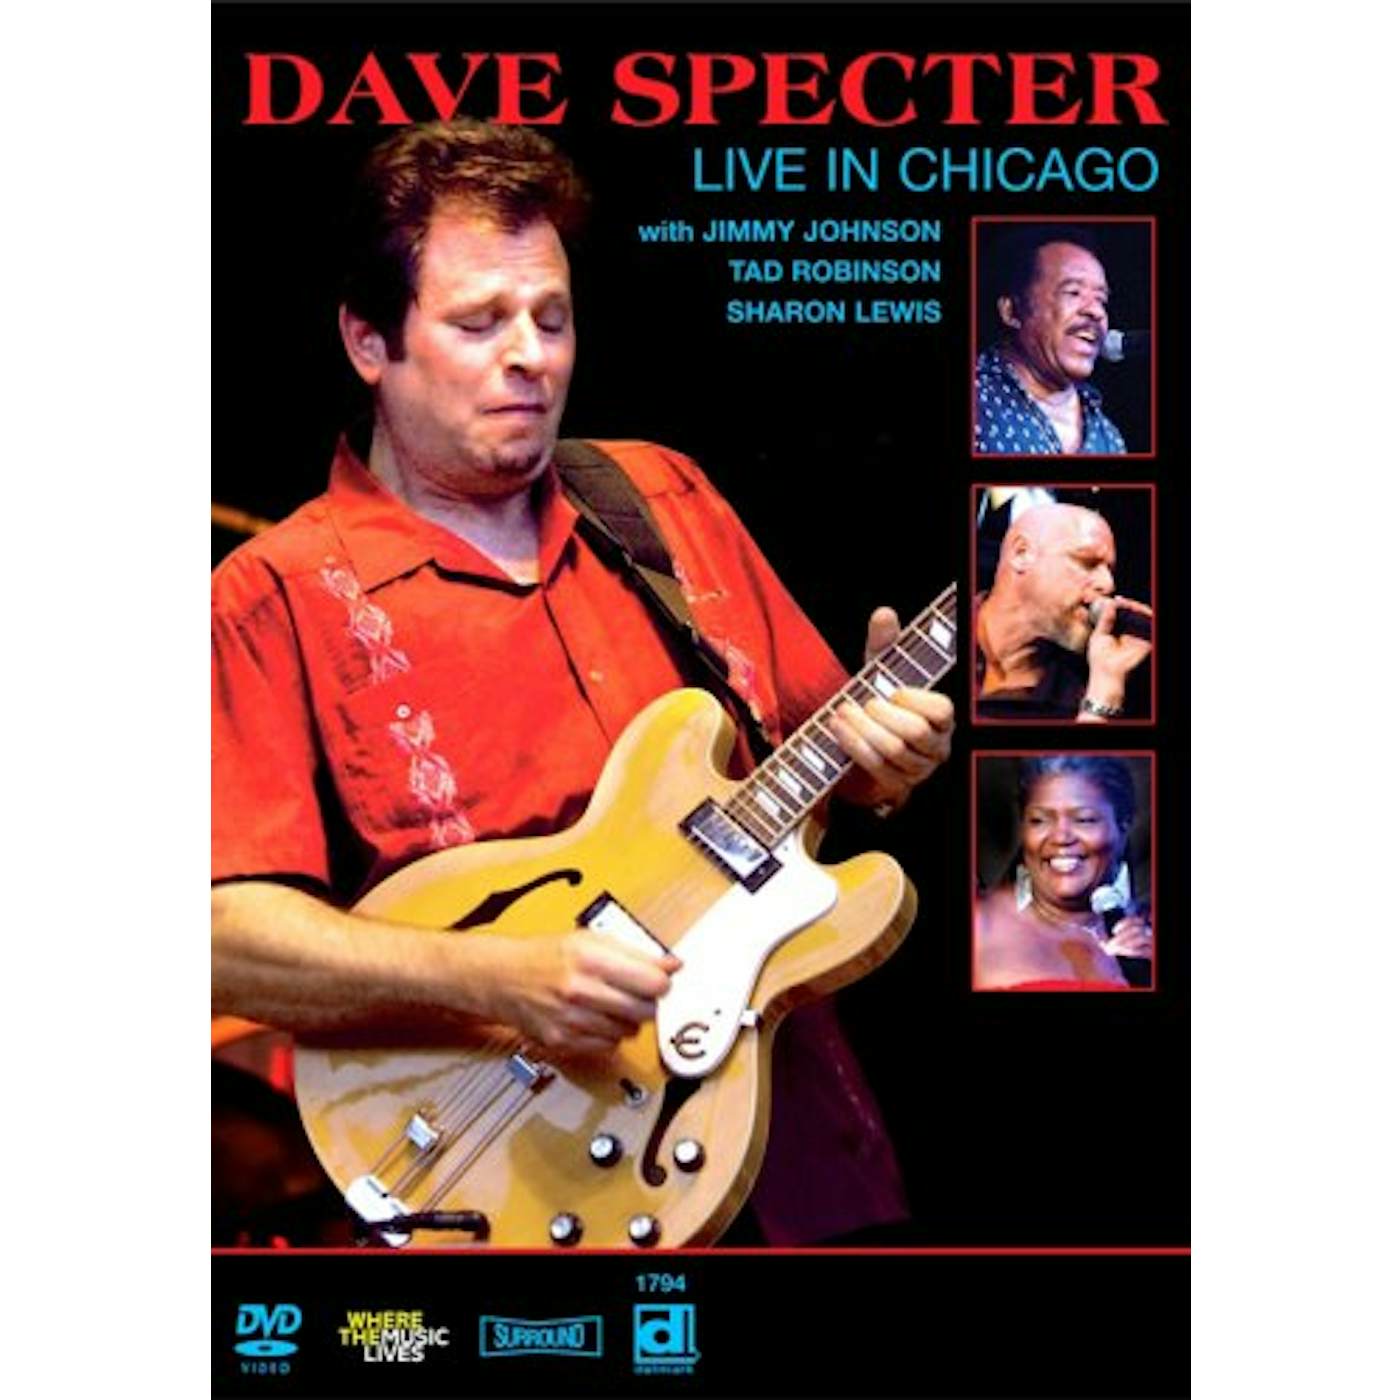 Dave Specter LIVE IN CHICAGO DVD